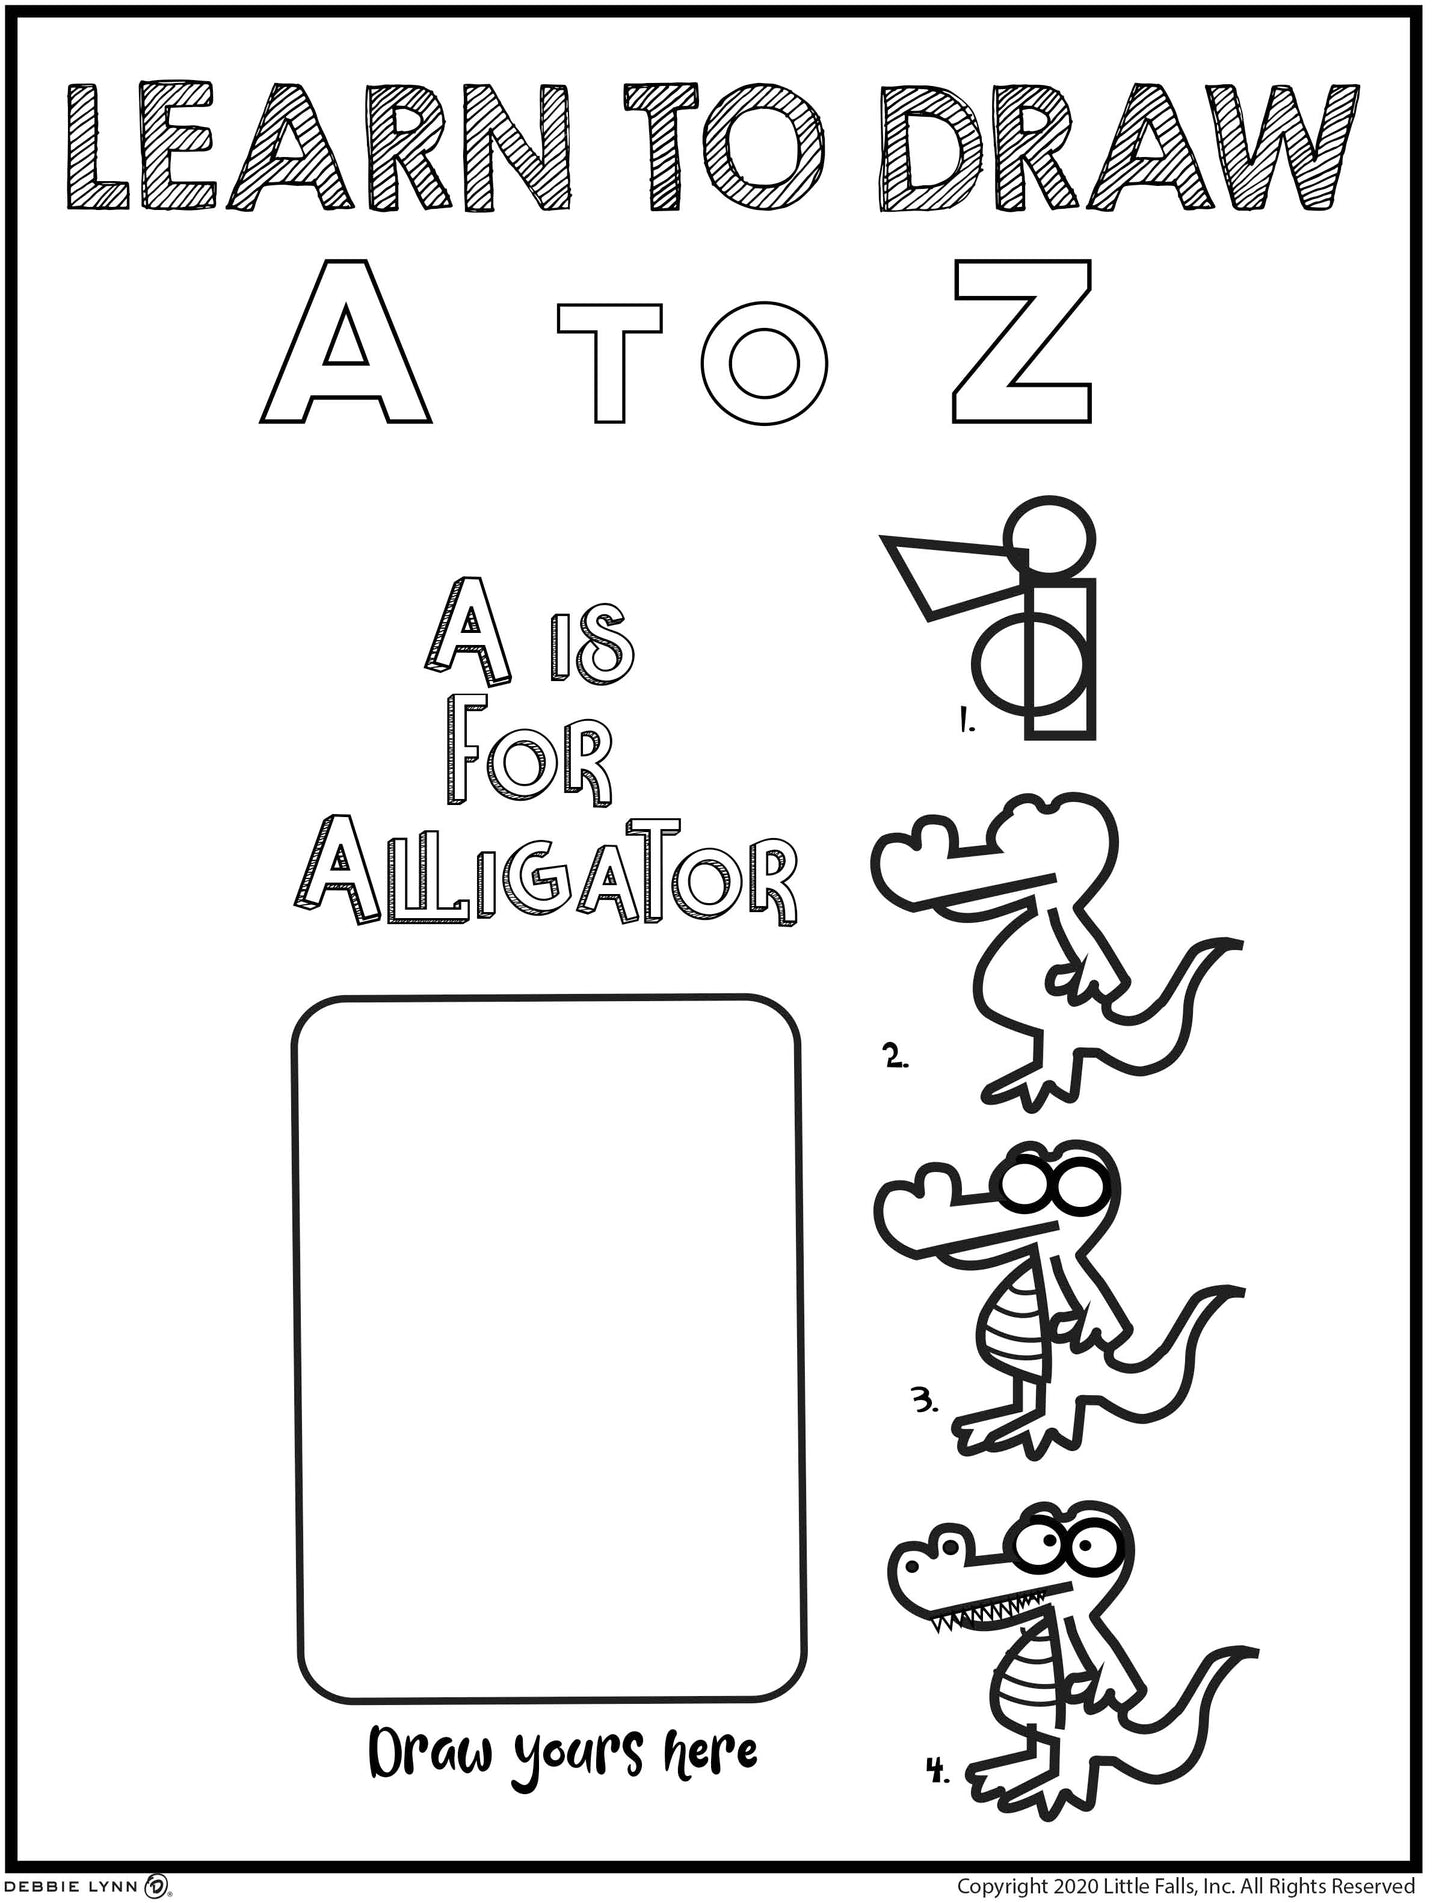 LEARNING TO DRAW A TO Z DOWNLOAD